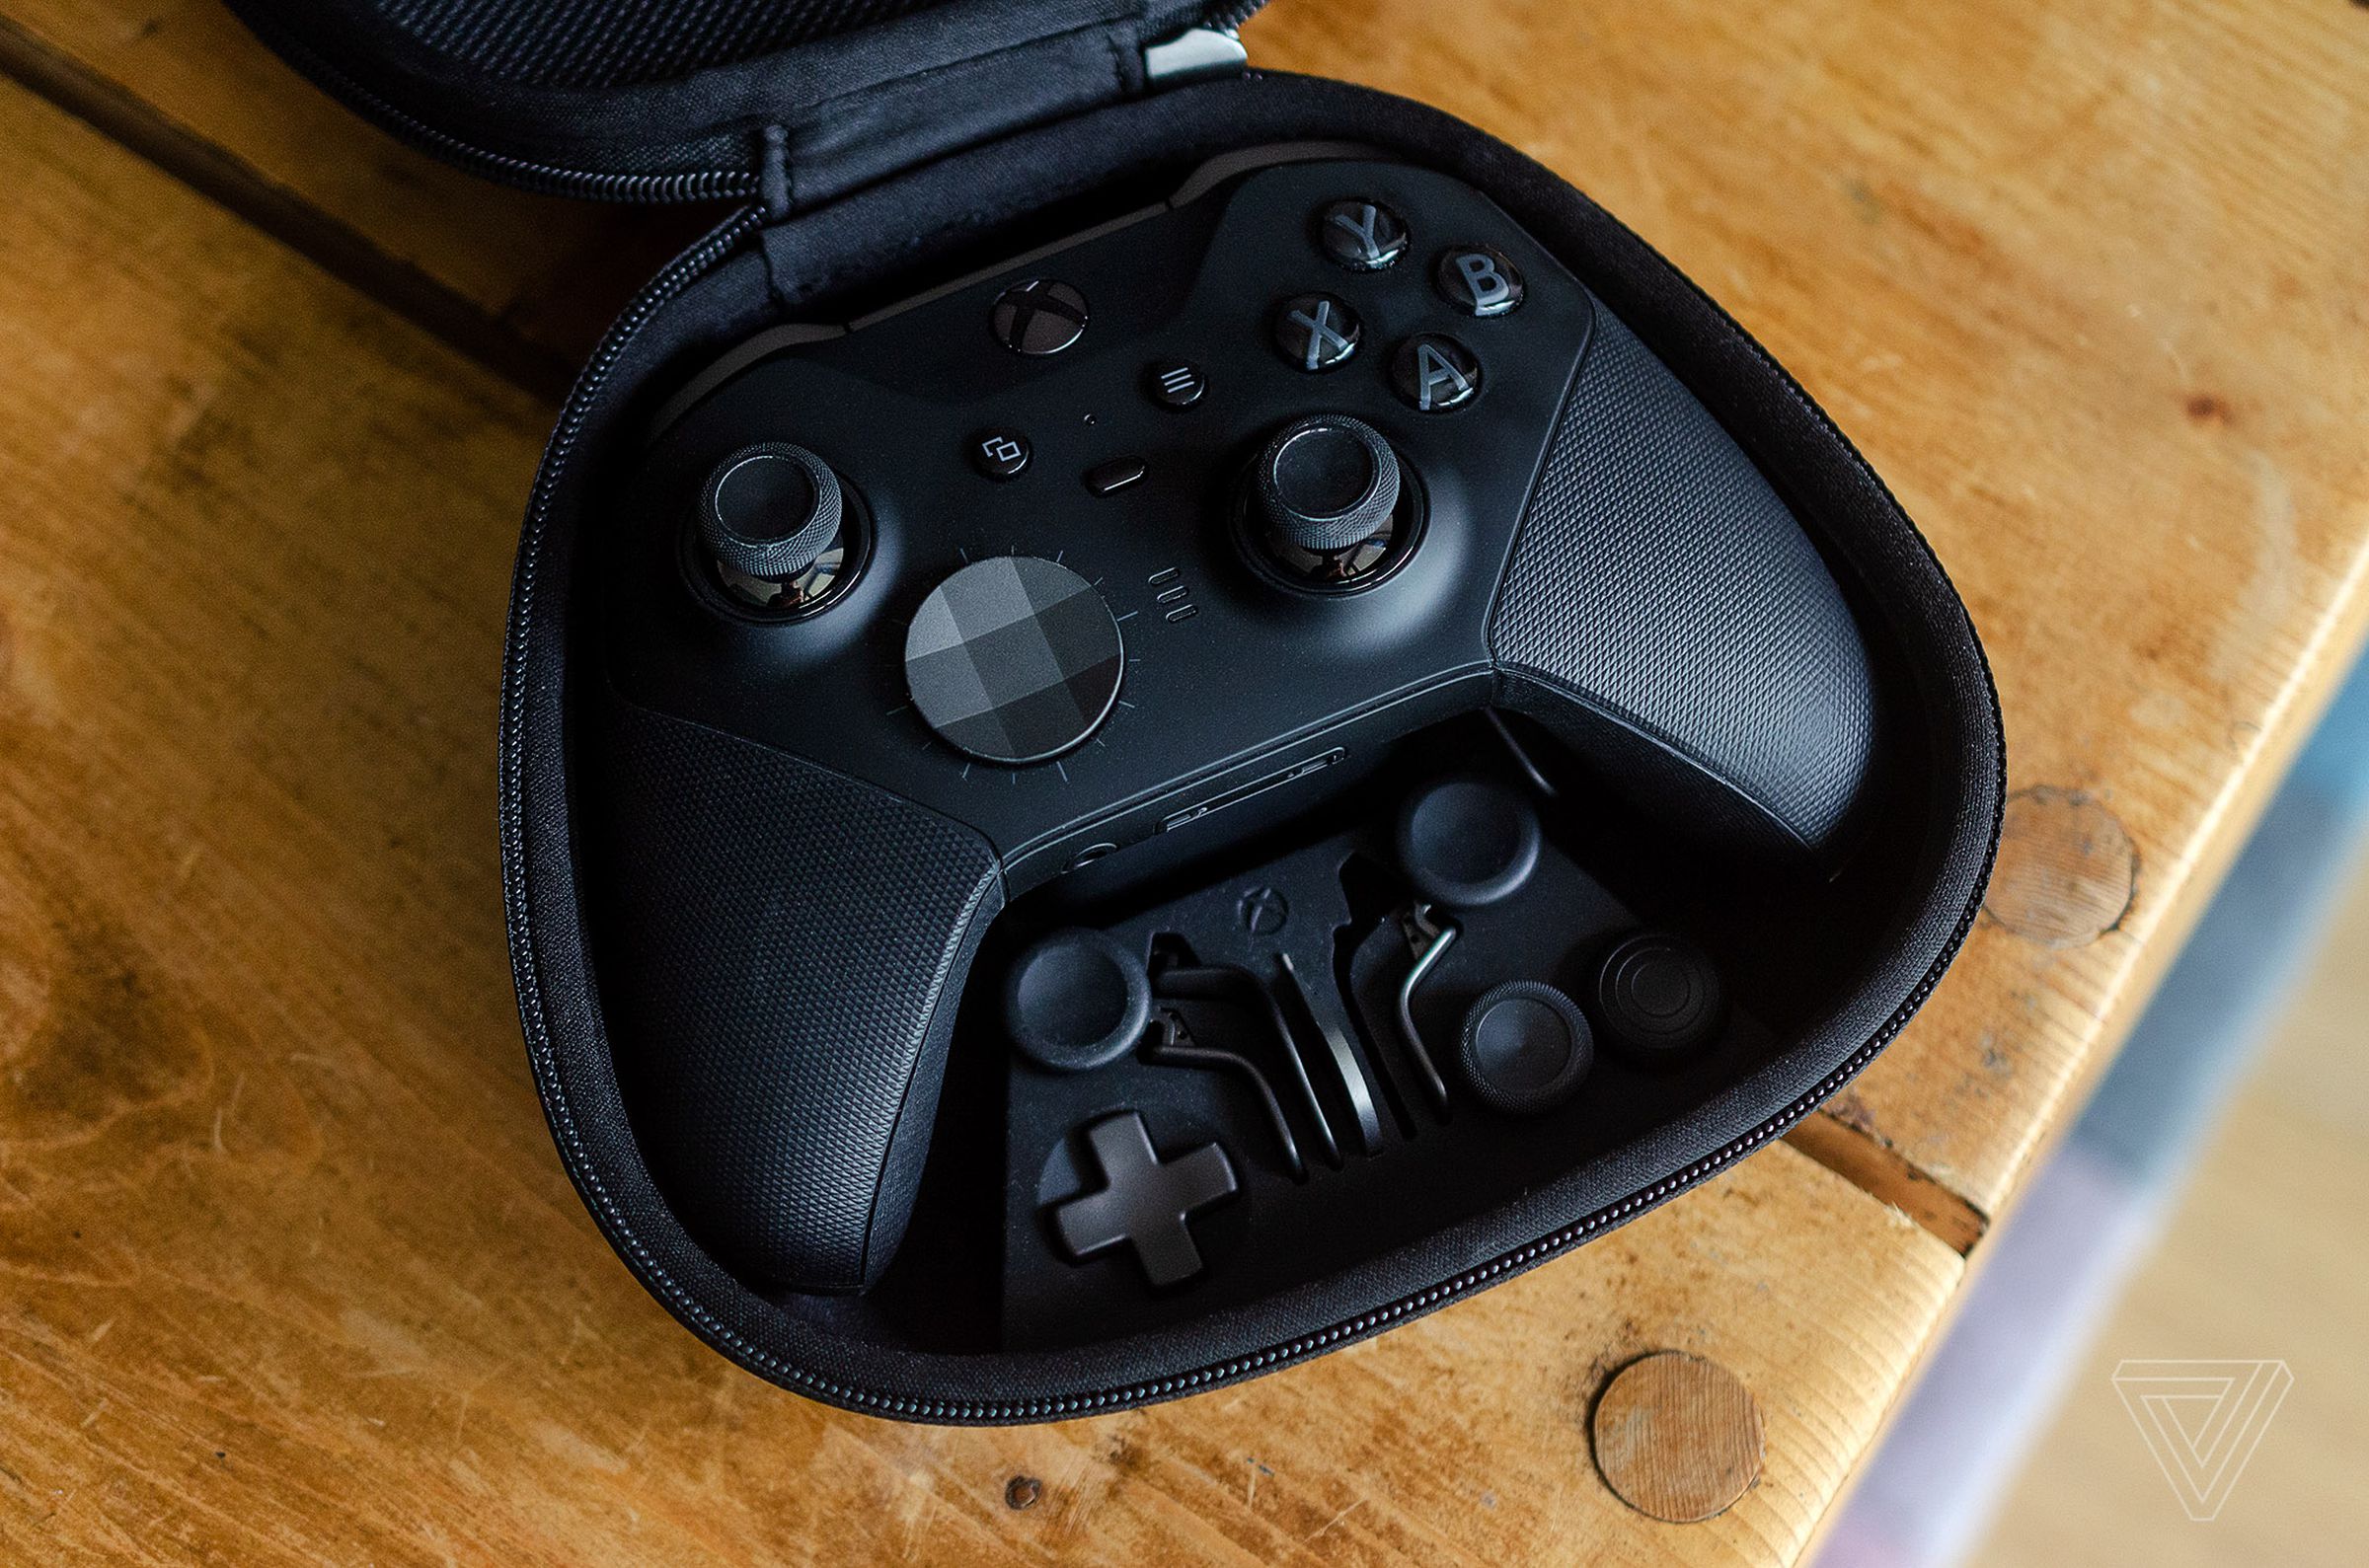 Flaws and all, the Elite Series 2 is a feature-rich controller, and it now carries a one-year warranty.